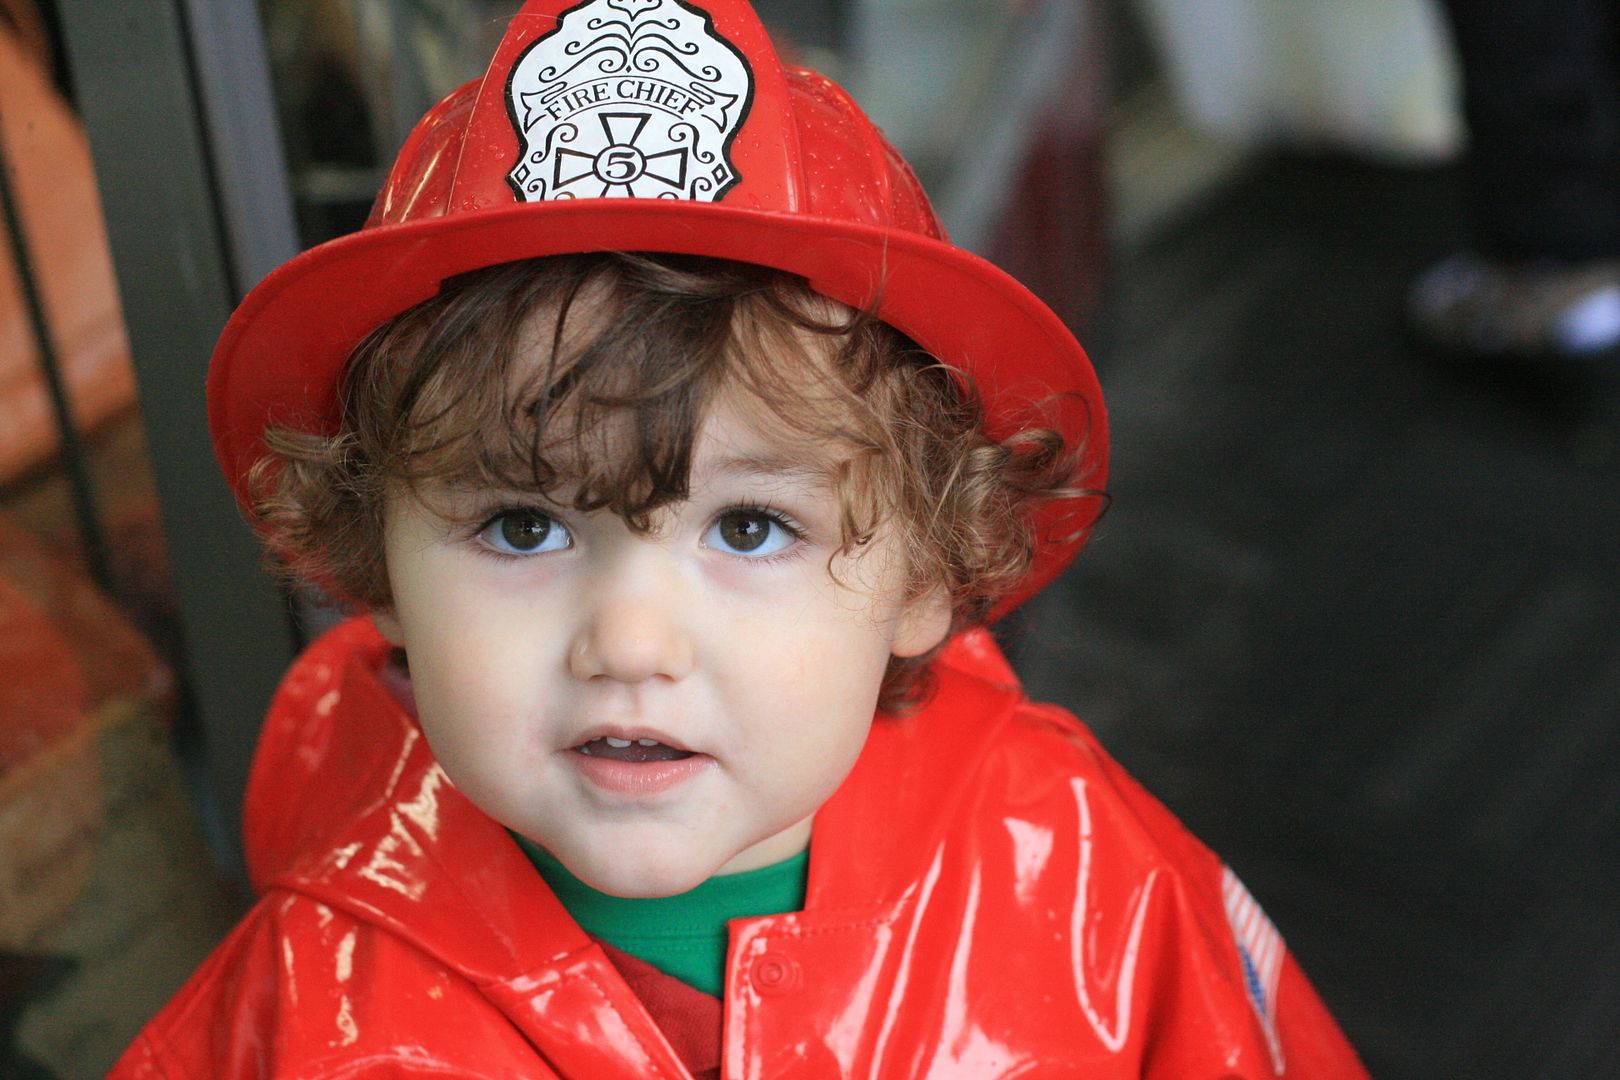 3 year old in firefighter costume on Halloween